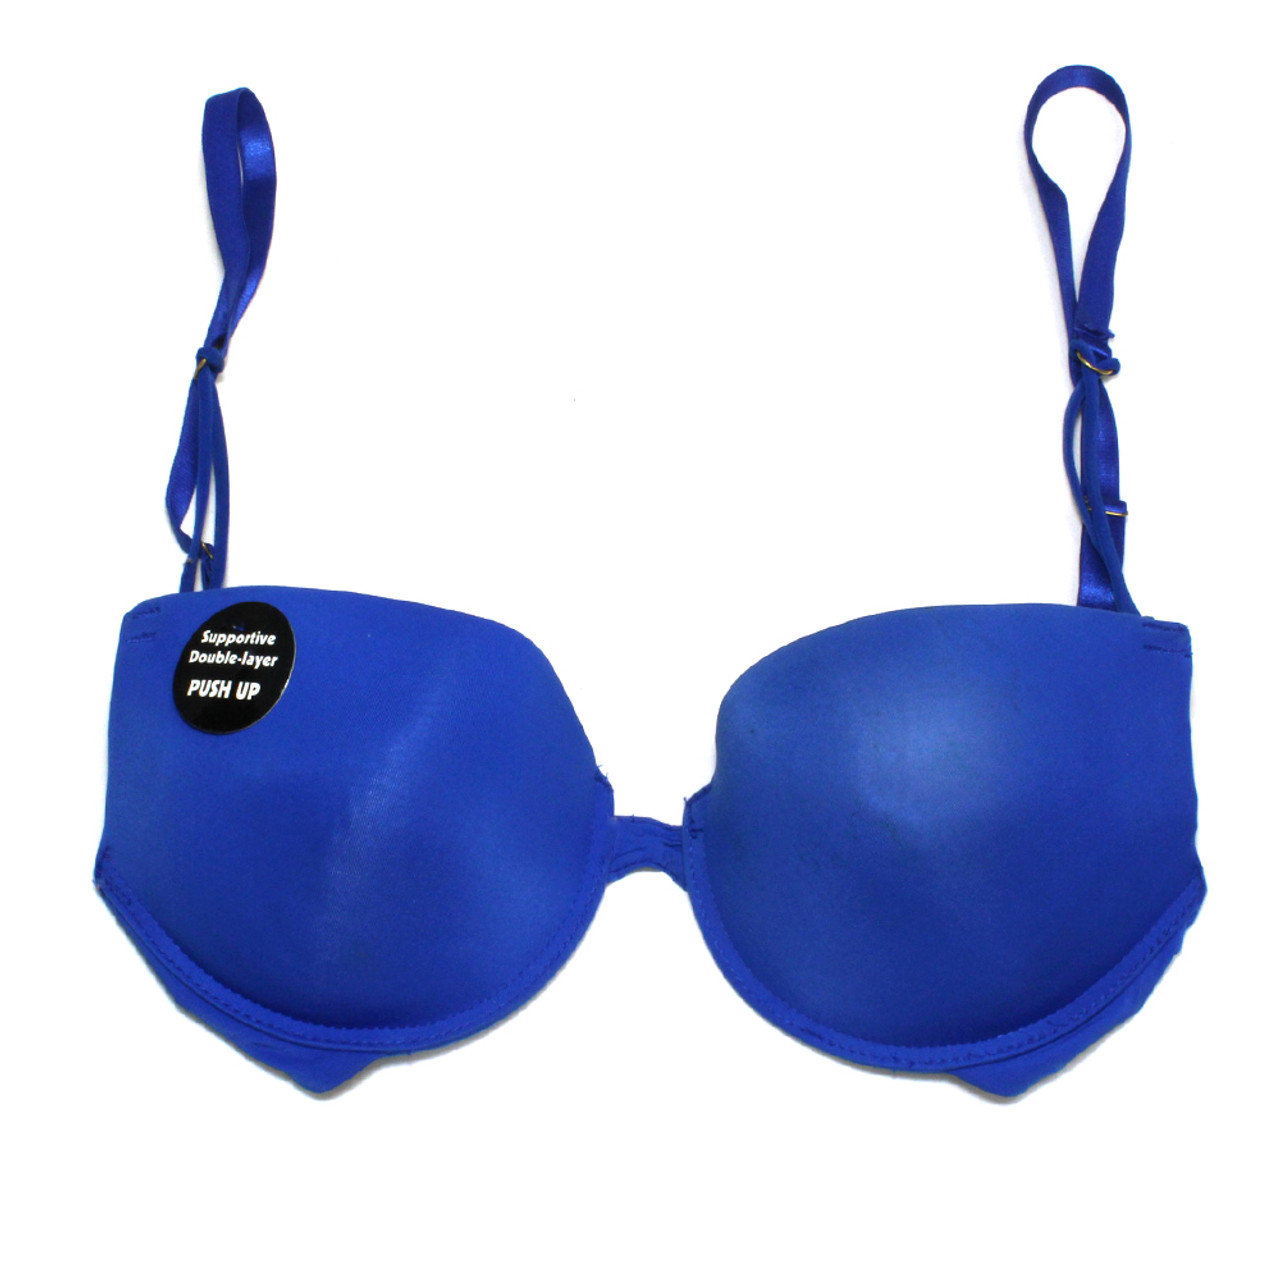 Push Up Punch Bra Cup, Water Drop Cup Bikini Sponge Underwear Bra Inserts  Invisible Bra Pads $0.37 - Wholesale China Bra Cup at factory prices from  Yiwu Jinhong Garment Accessories Co., Ltd.